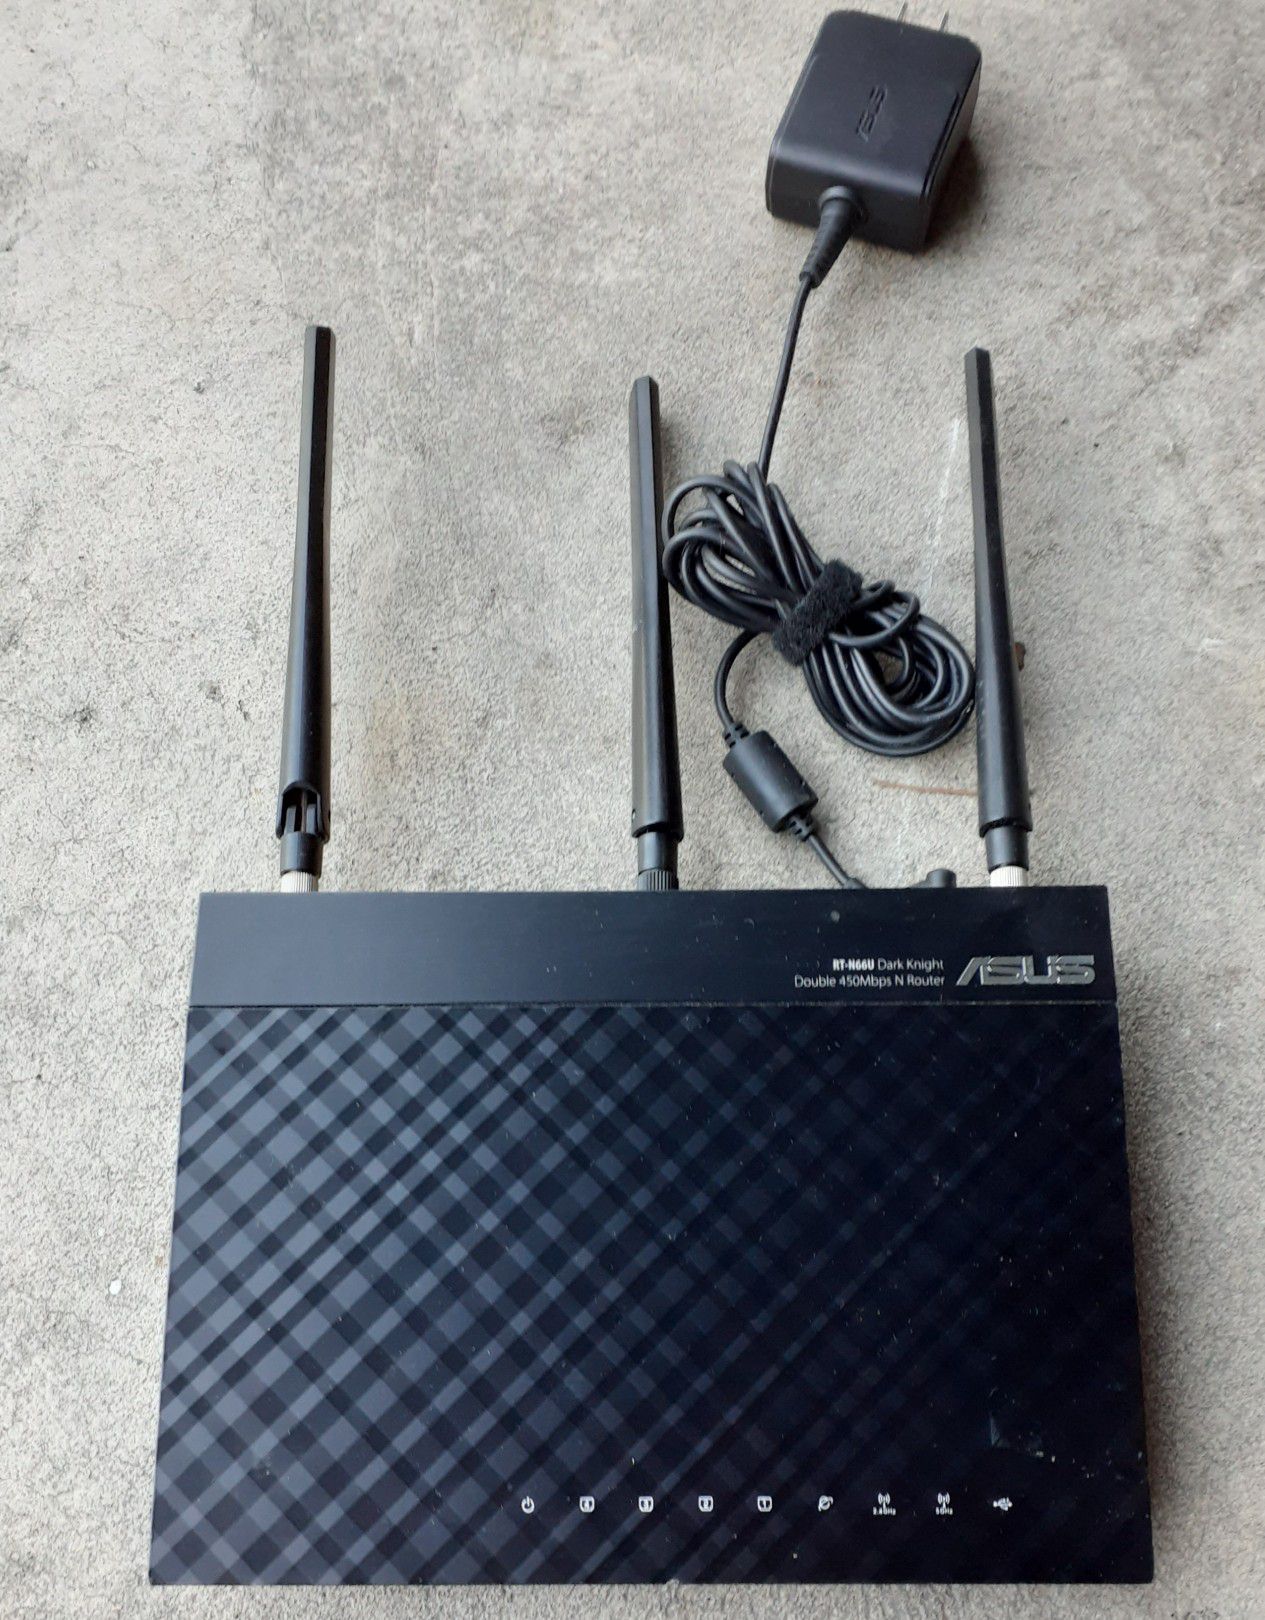 Asus wireless N Dual Band Dark knight Long range router Rt-N66U First come first served 49$ OBO